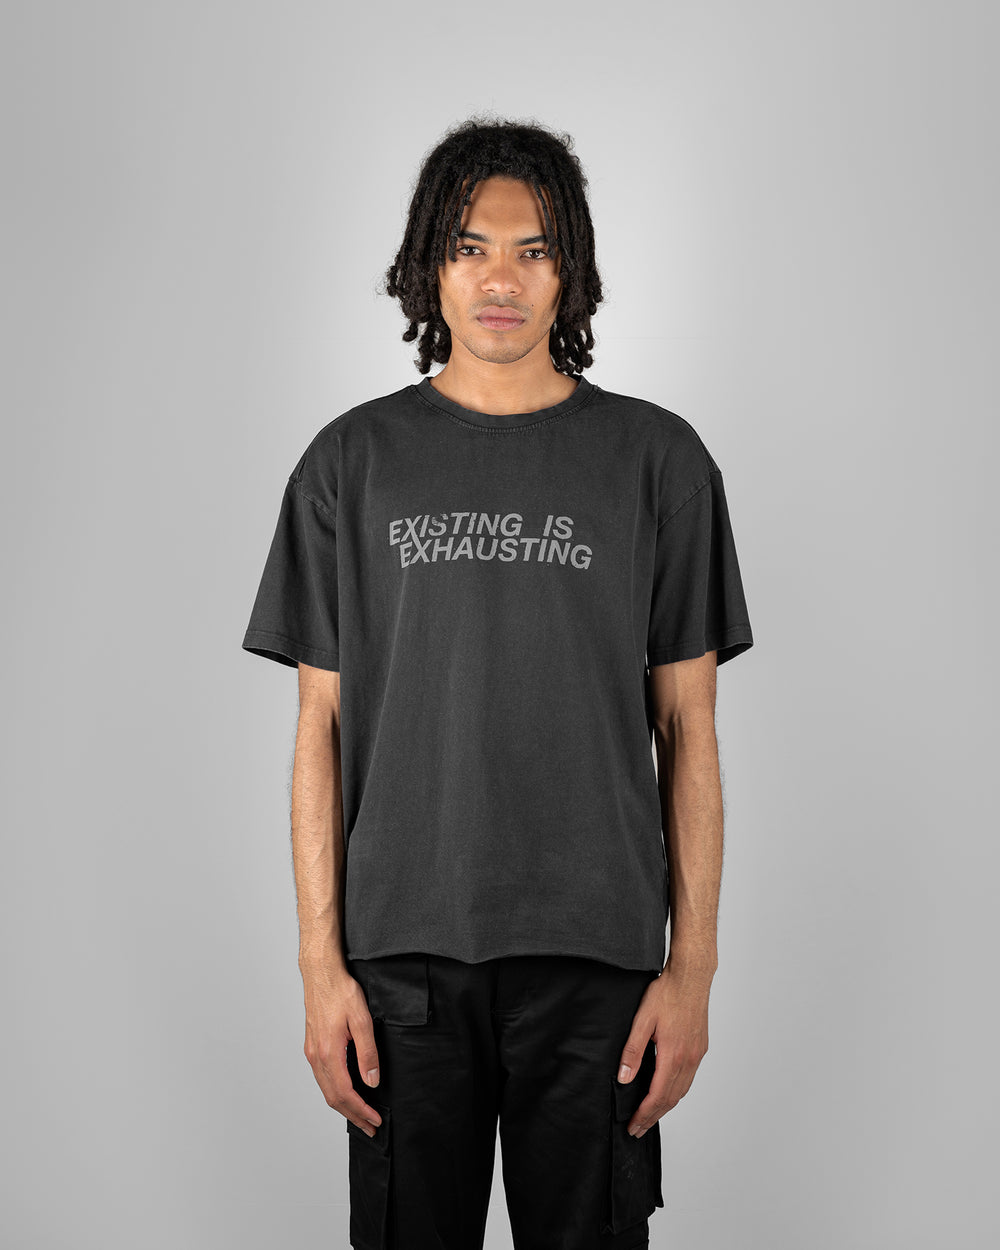 Existing is Exhausting T-Shirt – M X D V S